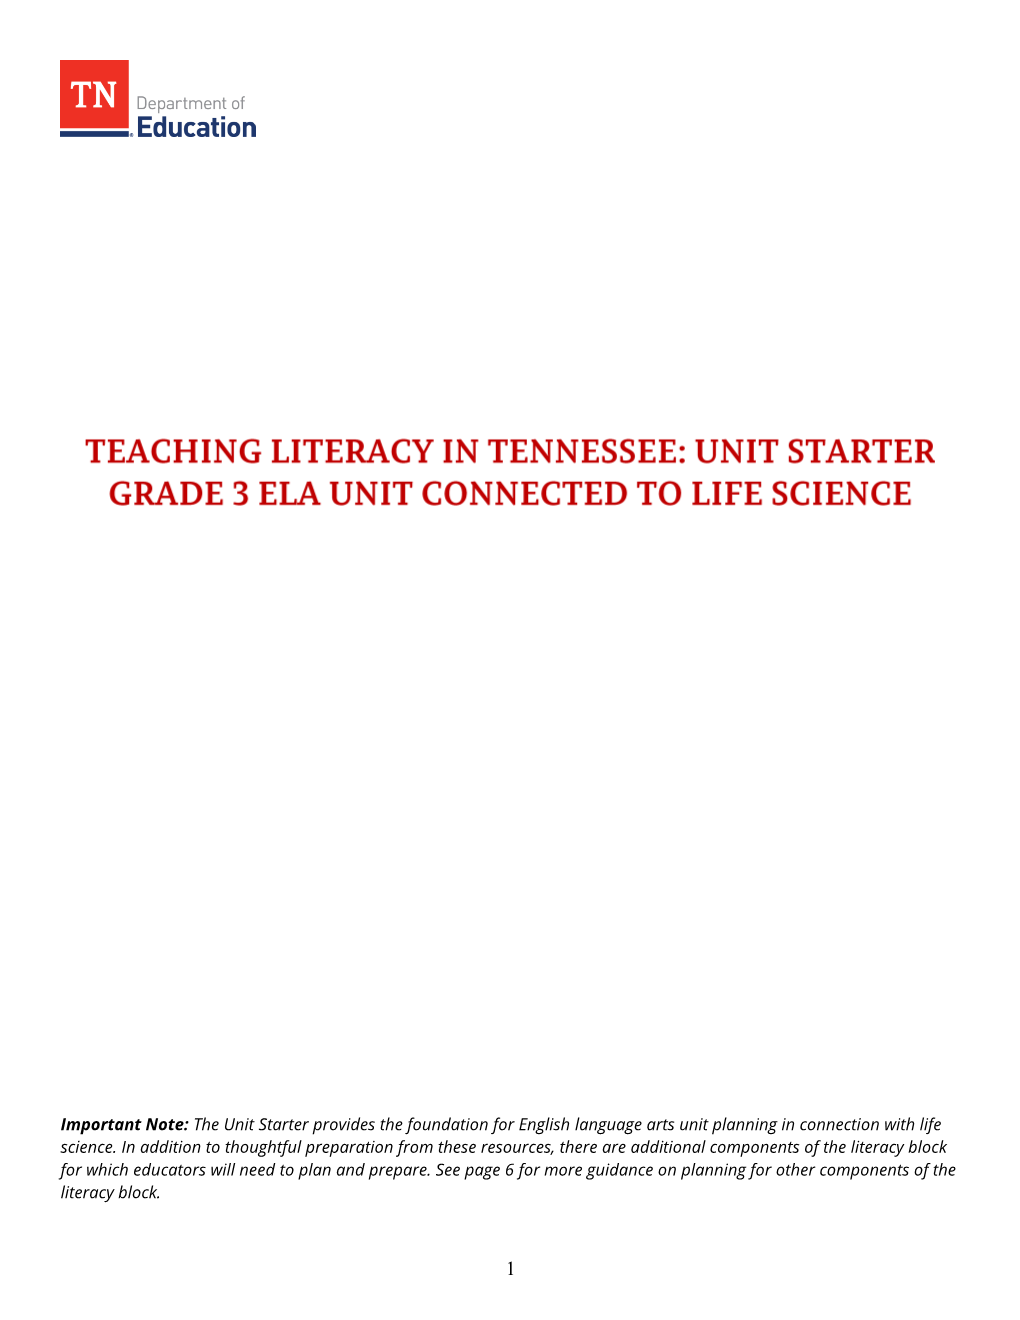 Important Note: the Unit Starter Provides the Foundation for English Language Arts Unit Planning in Connection with Life Science